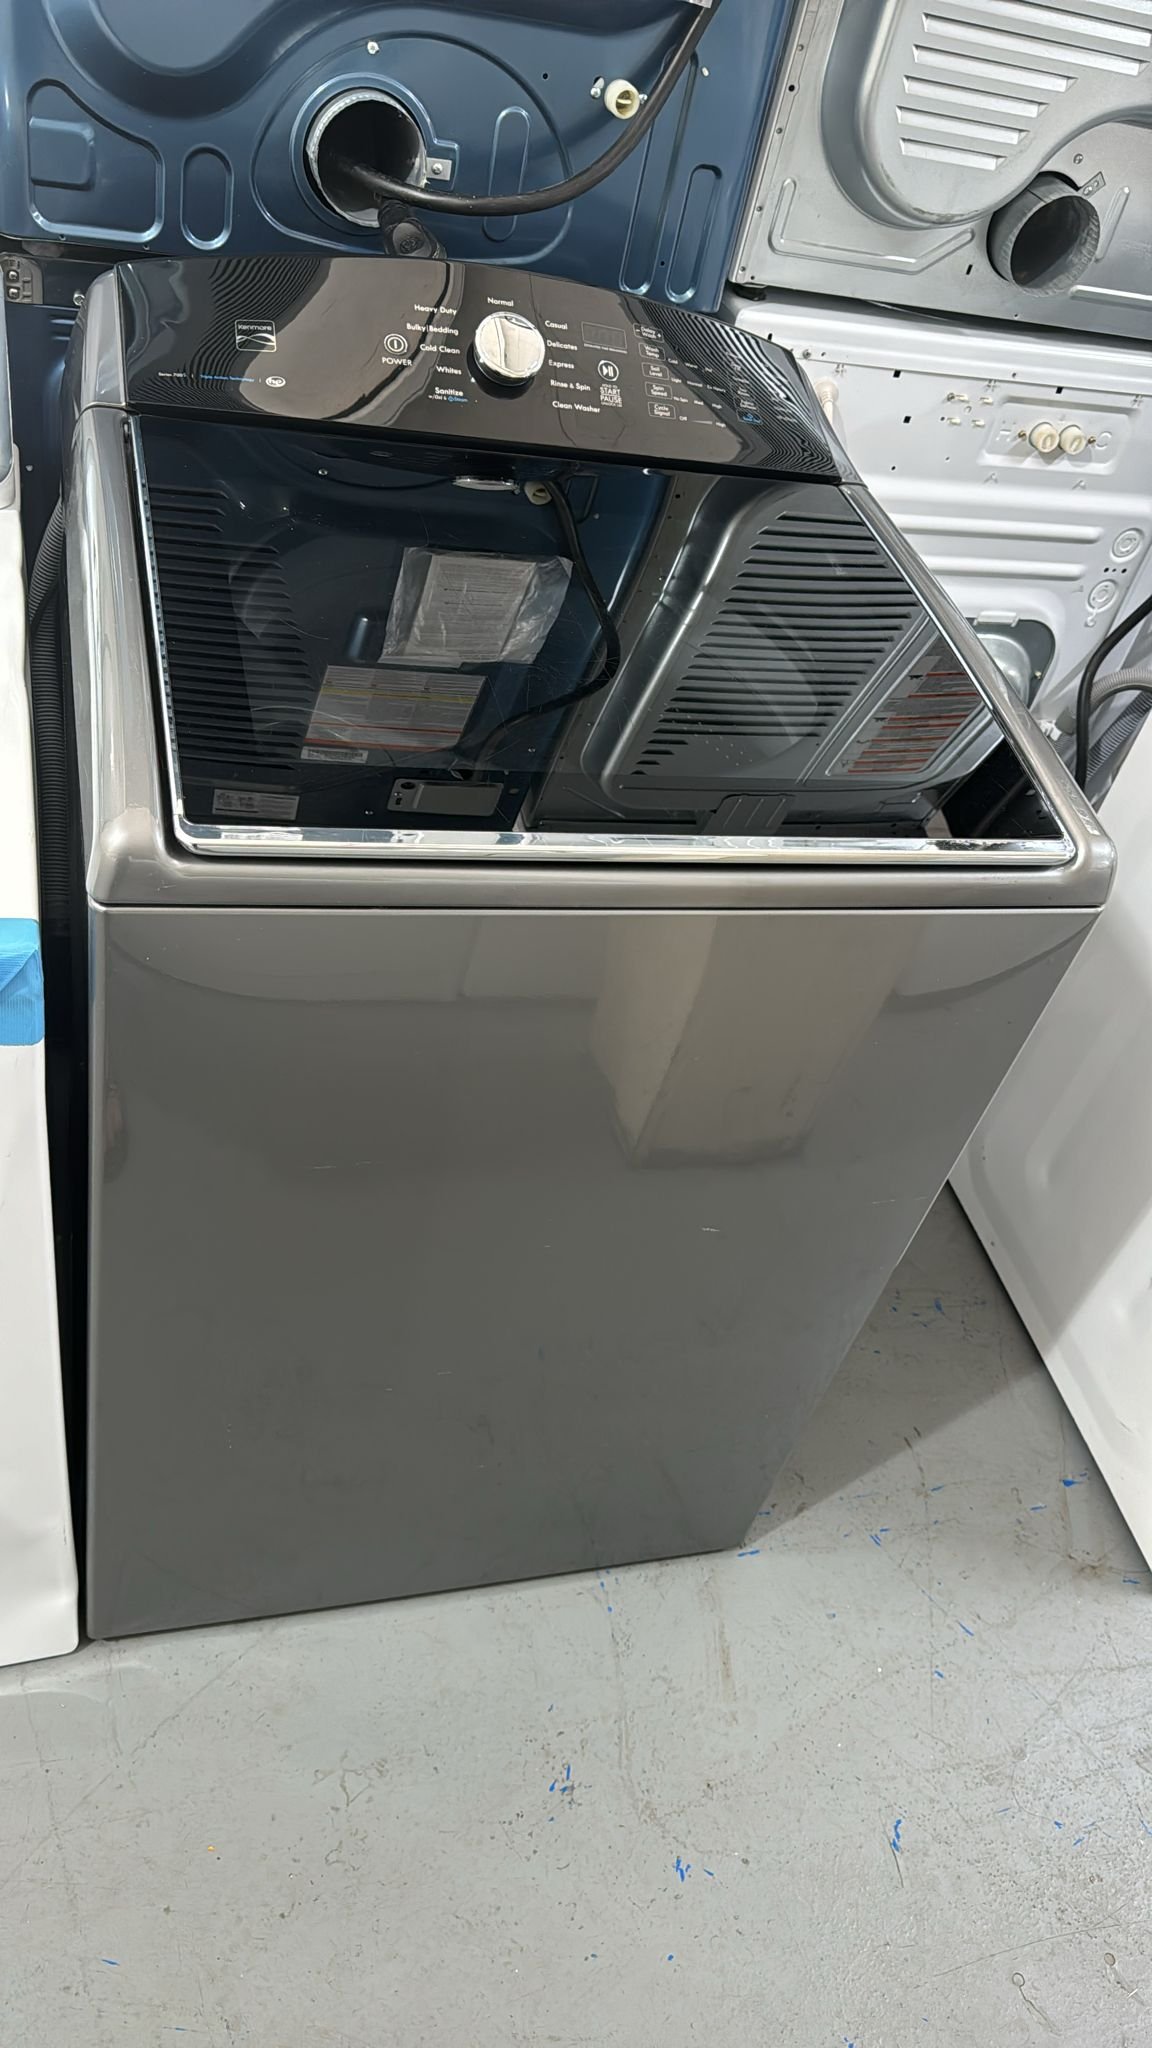 Kenmore Used Top Load Washer